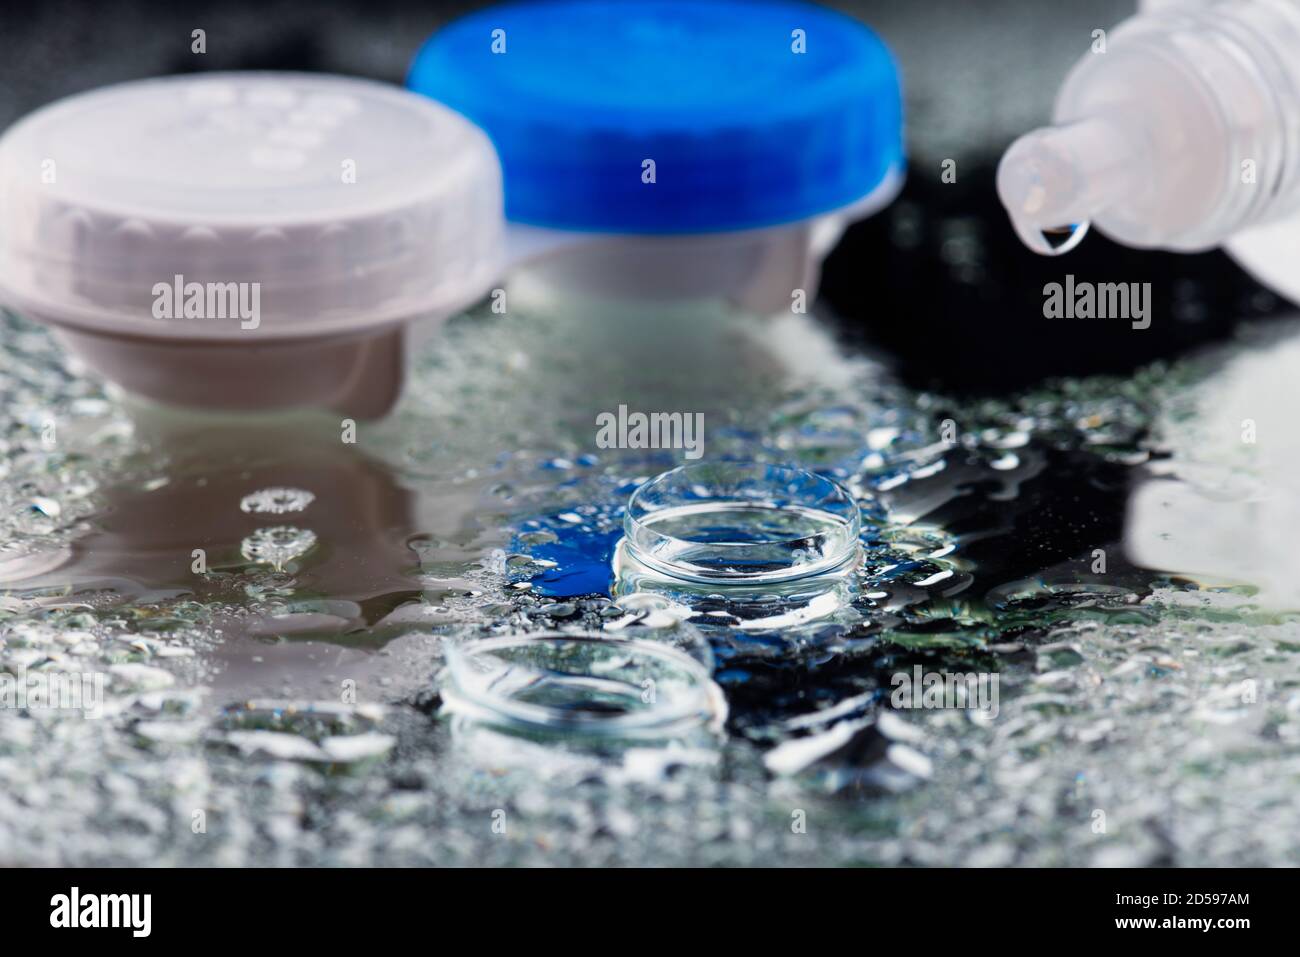 Contact lens, case and bottle of solution Stock Photo